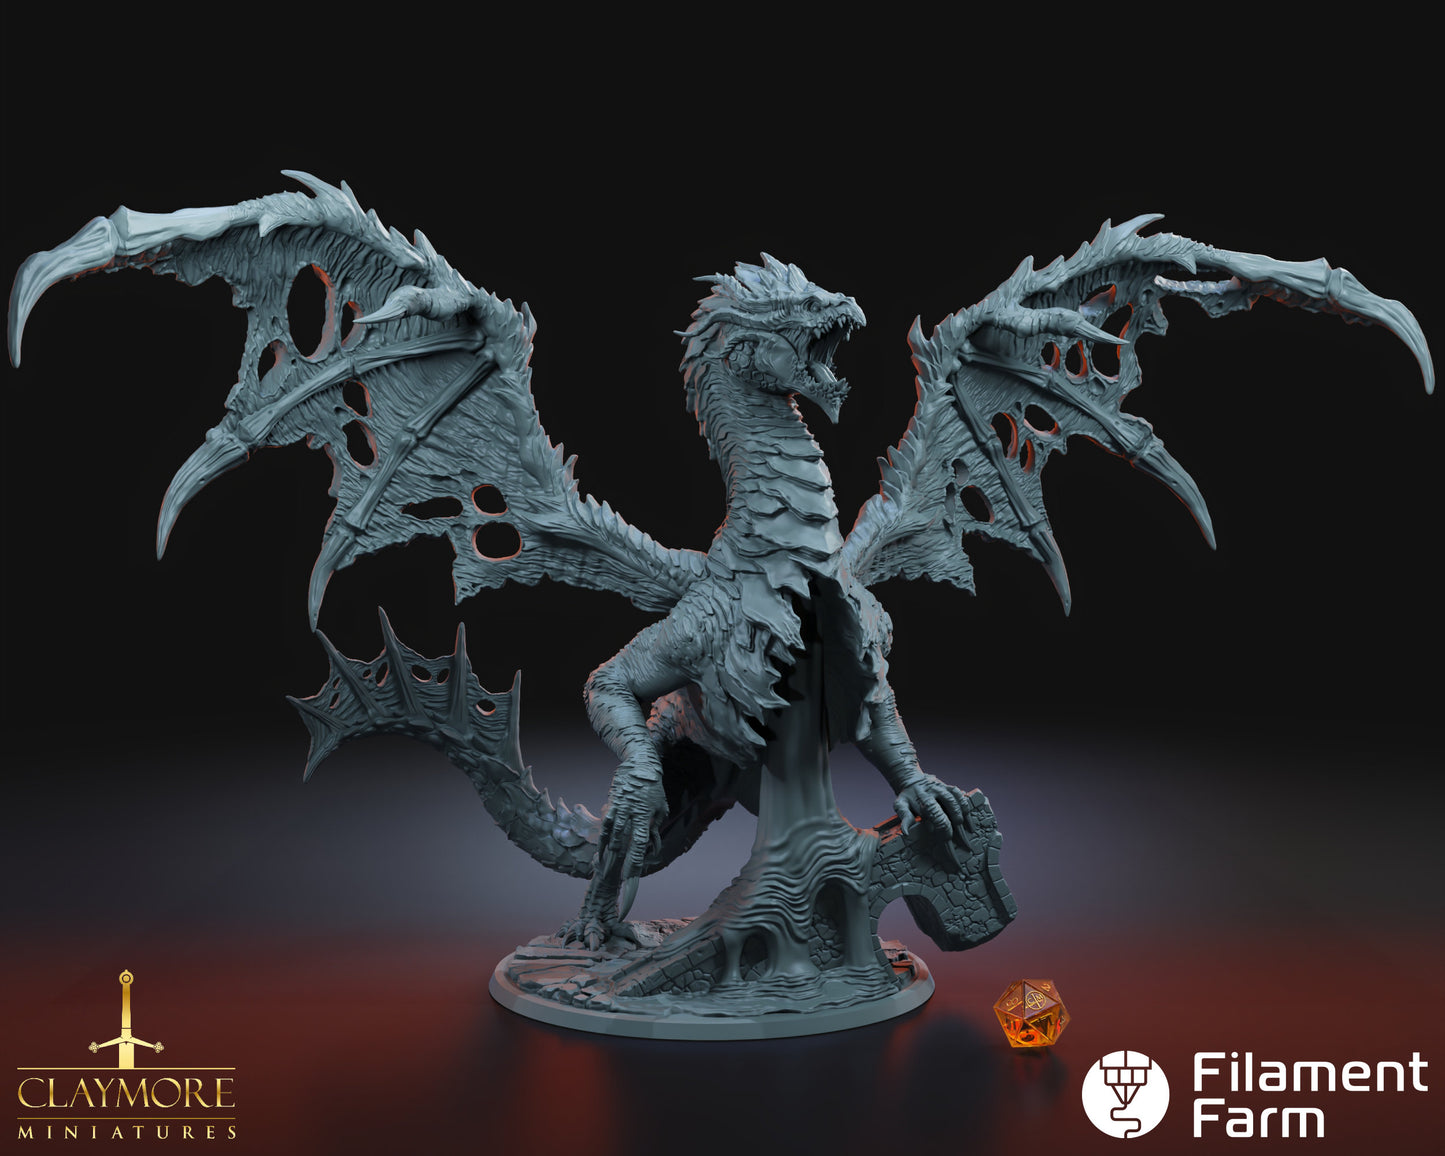 Malebolge, The Sinner Devourer, Green Dragon - Wages of Sin - Highly Detailed Resin 3D Printed Miniature